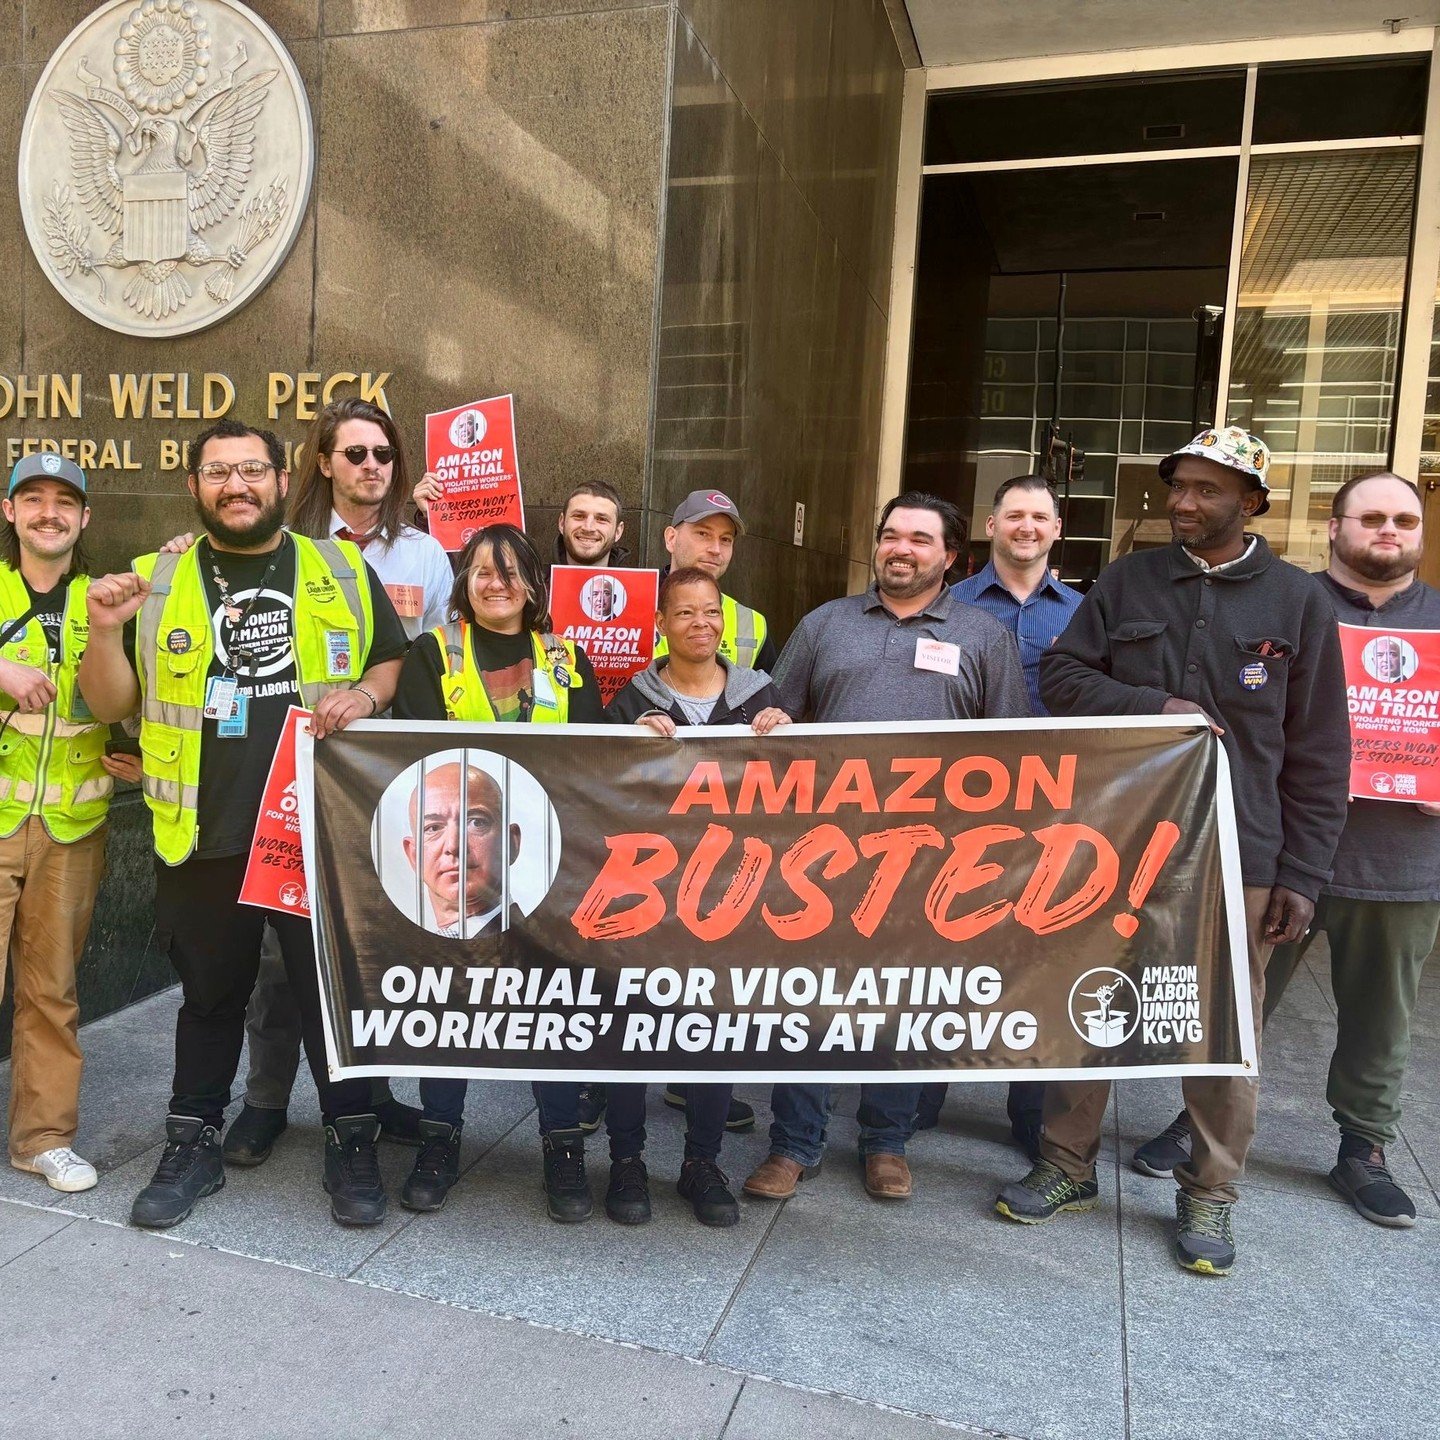 Amazon was charged with breaking the law &amp; violating our rights. Now they&rsquo;re refusing to pay workers who are witnesses in the trial for our lost days of work.

Help replace our lost wages during the trial since Amazon refuses to &mdash; mak